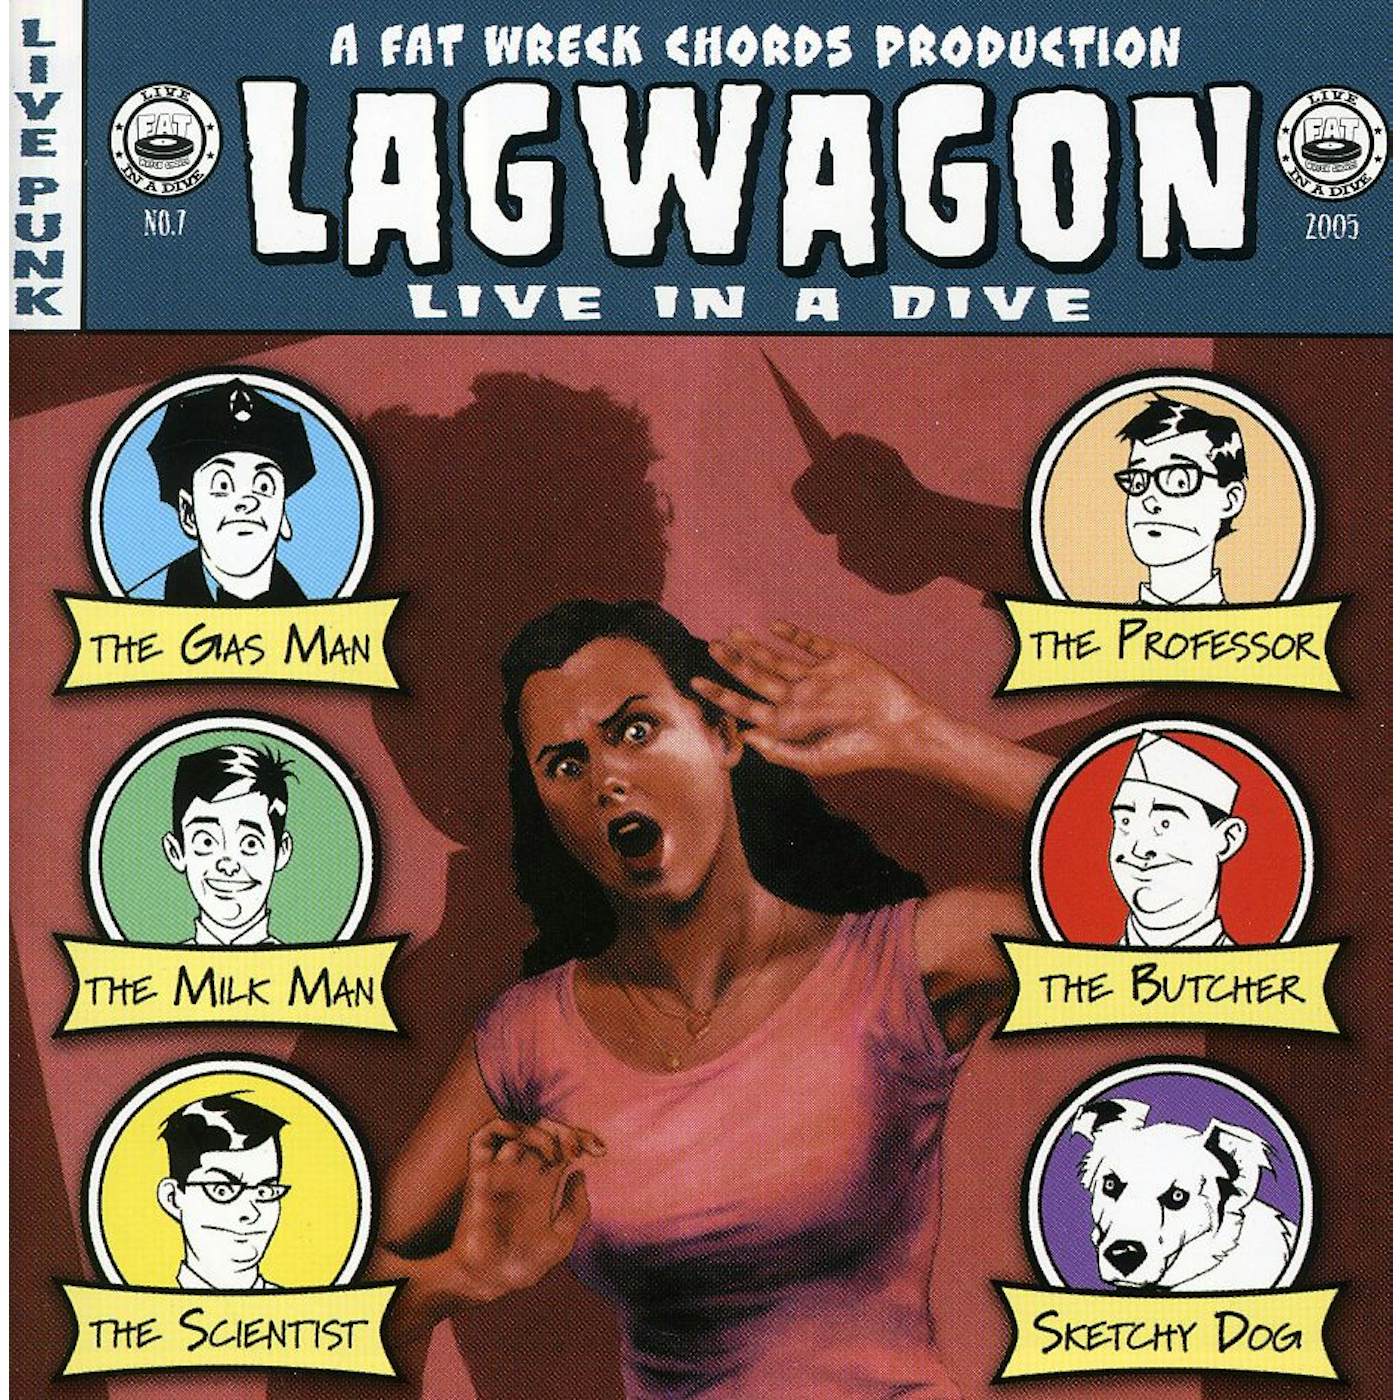 Lagwagon LIVE IN A DIVE CD